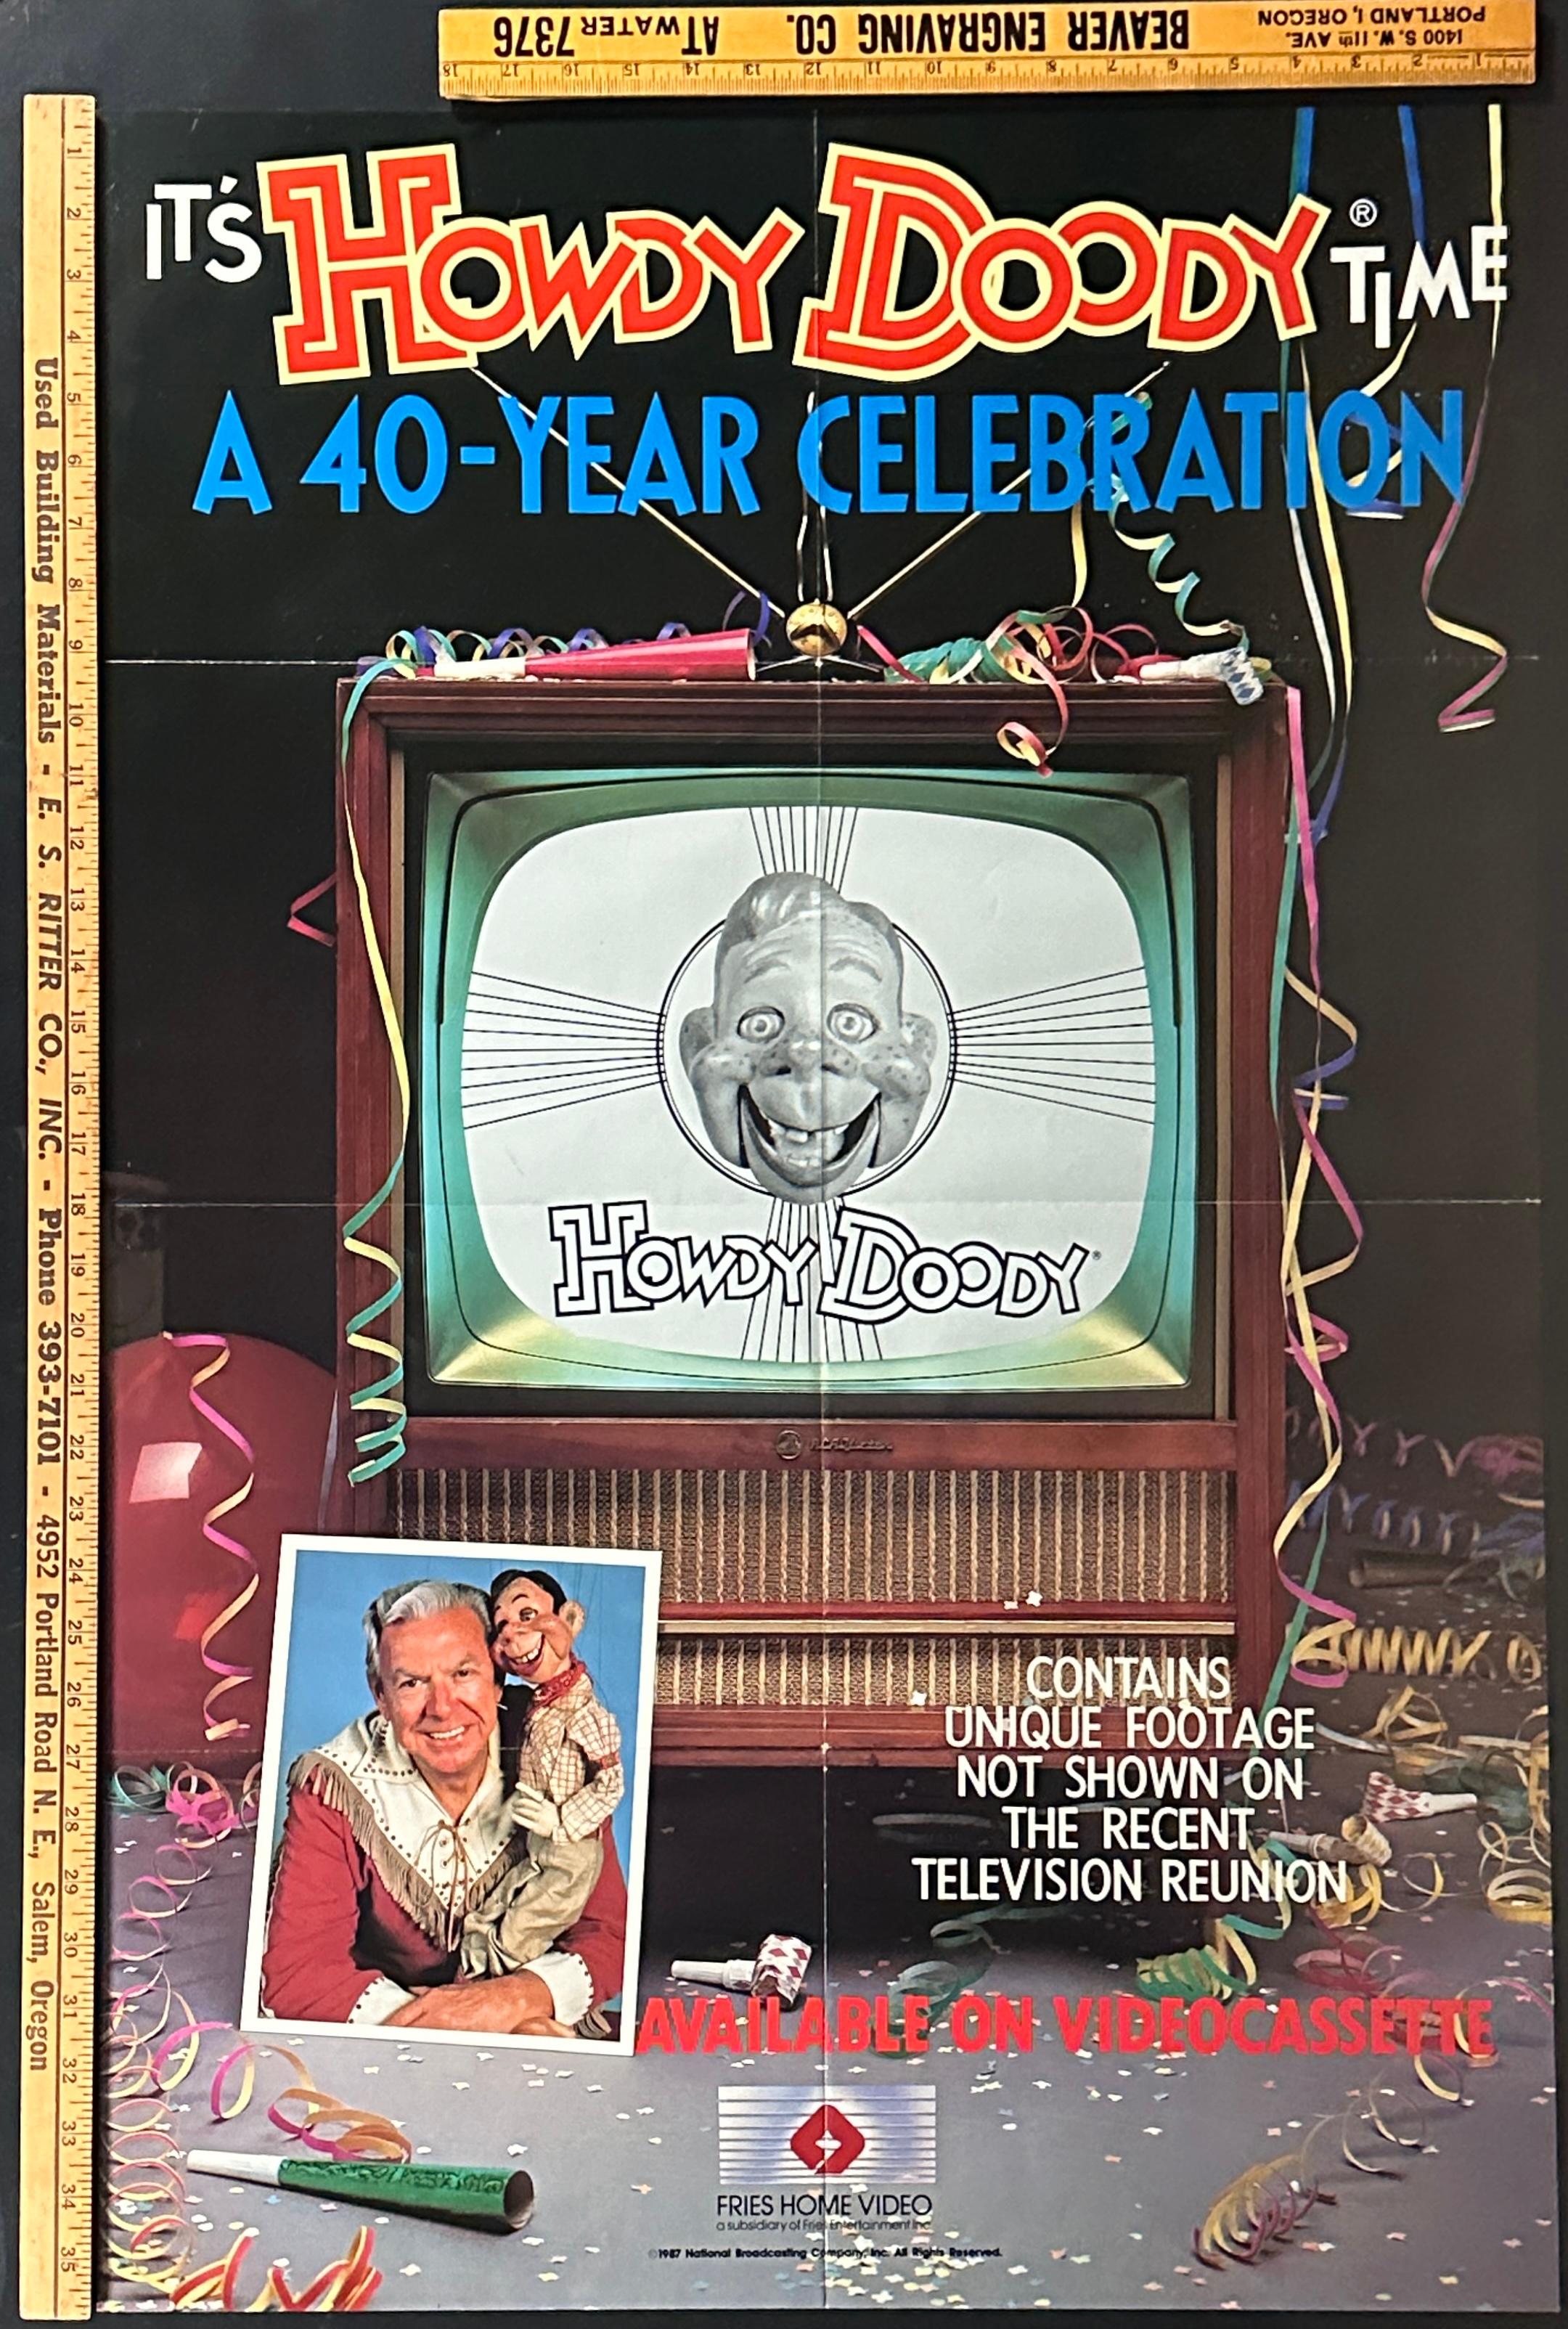 1987 It's Howdy Doody Time A 40-Year Cellebration Advertising Poster